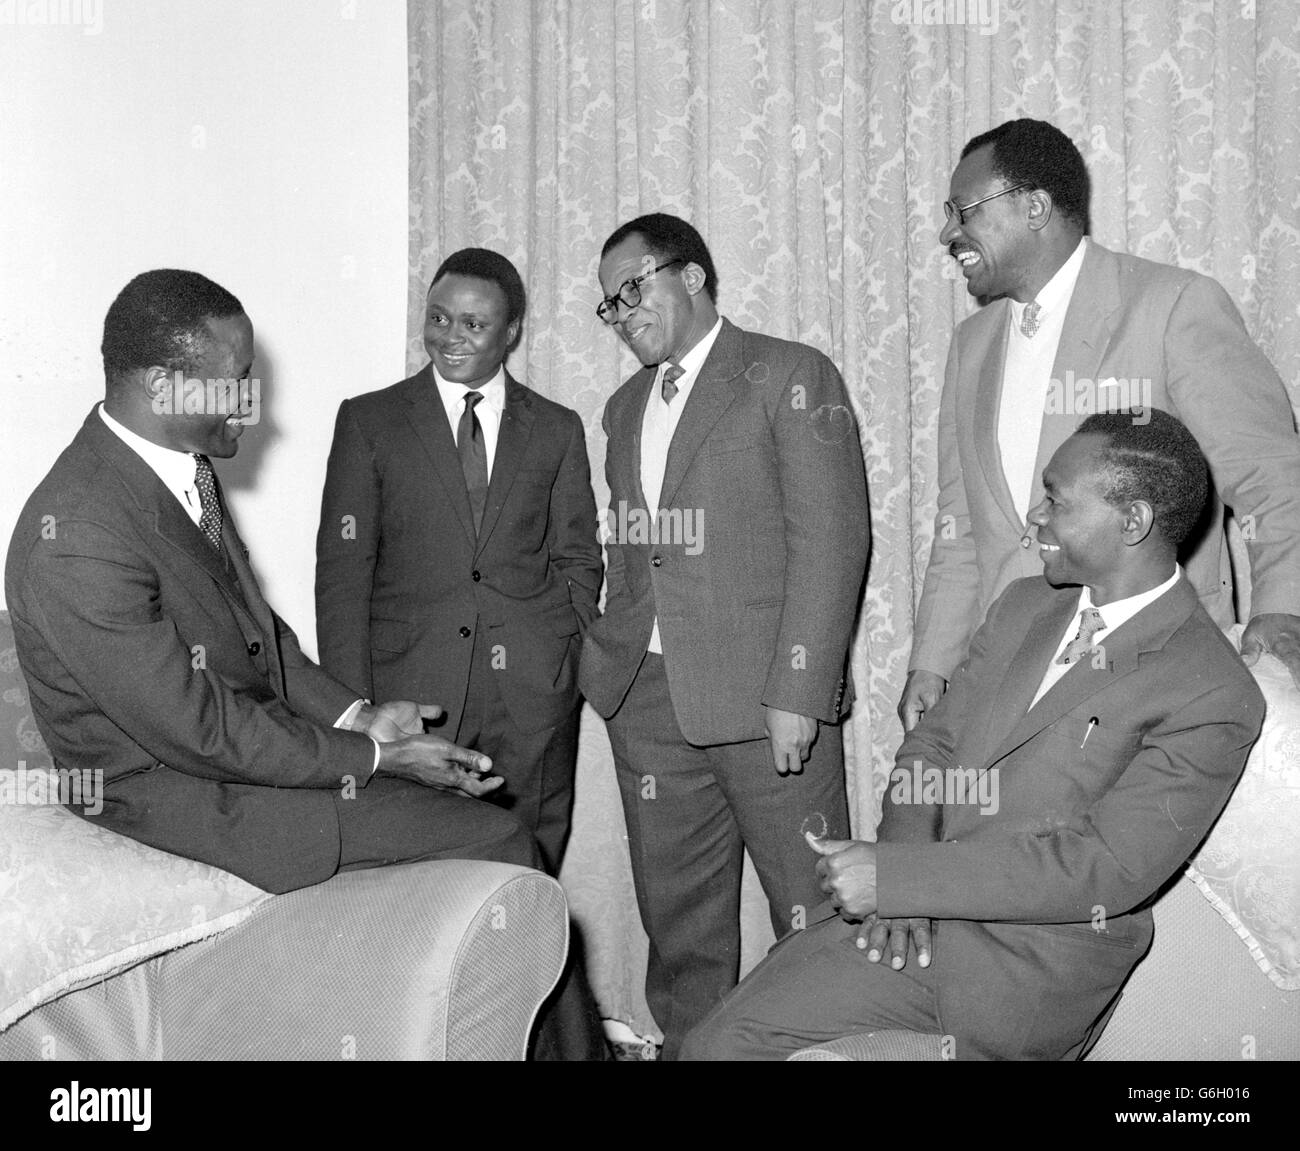 Left to right: S.T Muna (British Cameroons Minister for Commerce and Industry), W.N.O. Effiom (British Cameroons Minister of Works and Transport), A.N. Jua (British Cameroons Minister of Social Service), P.M.Kale (President of the Kameroun United Party), and J.N.Foncha (Prime Minister of The British Cameroons). Stock Photo